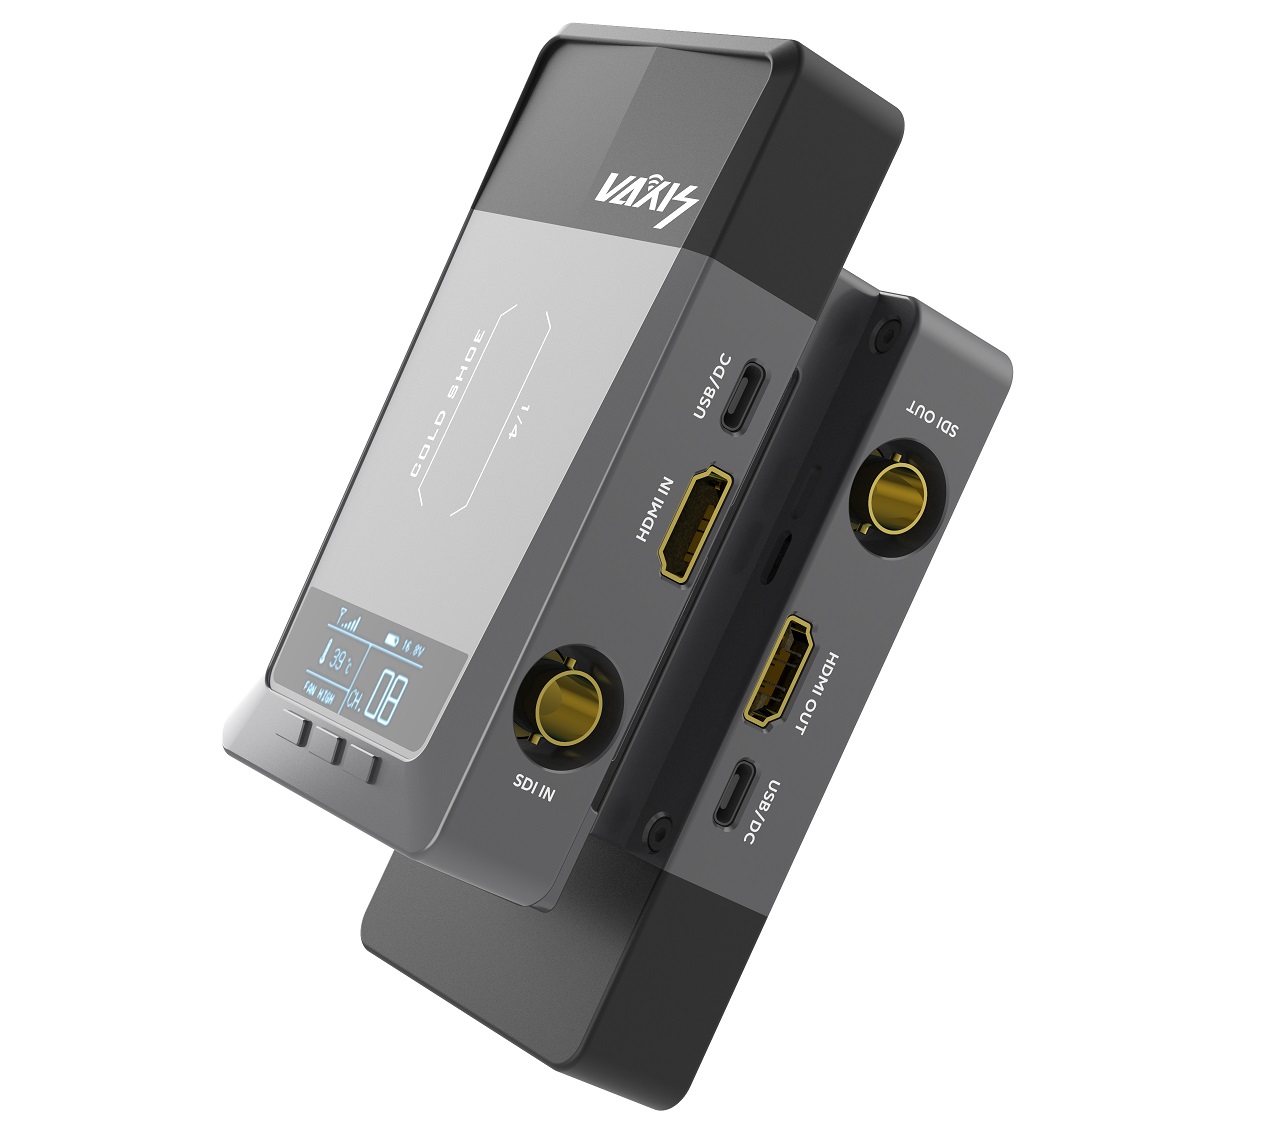 Vaxis ATOM 500 SDI Wireless Video System Announced | CineD